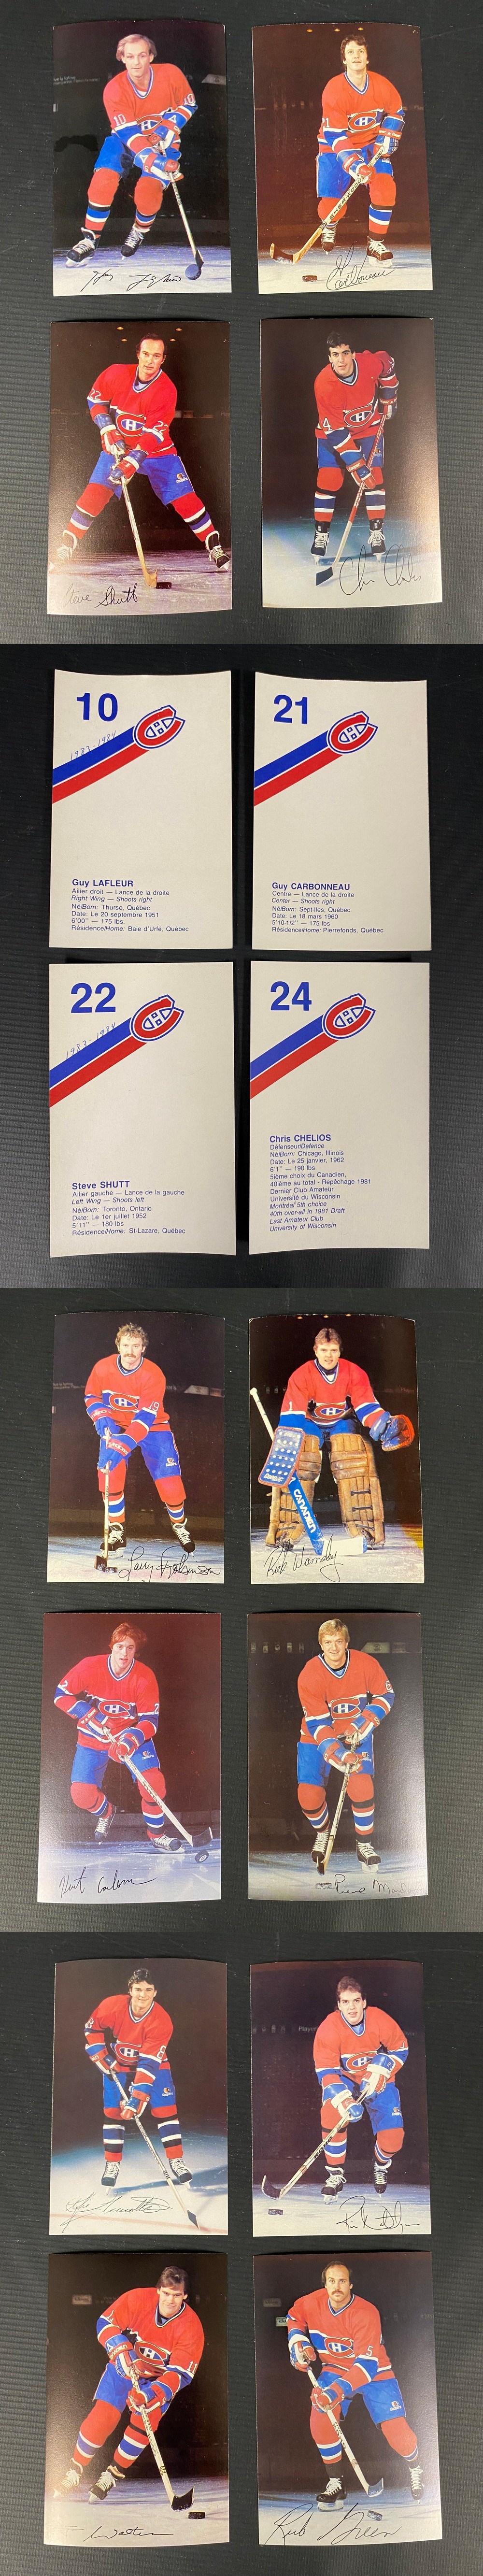 1984-85 MONTREAL CANADIENS POST CARD FULL SET 32/32 photo